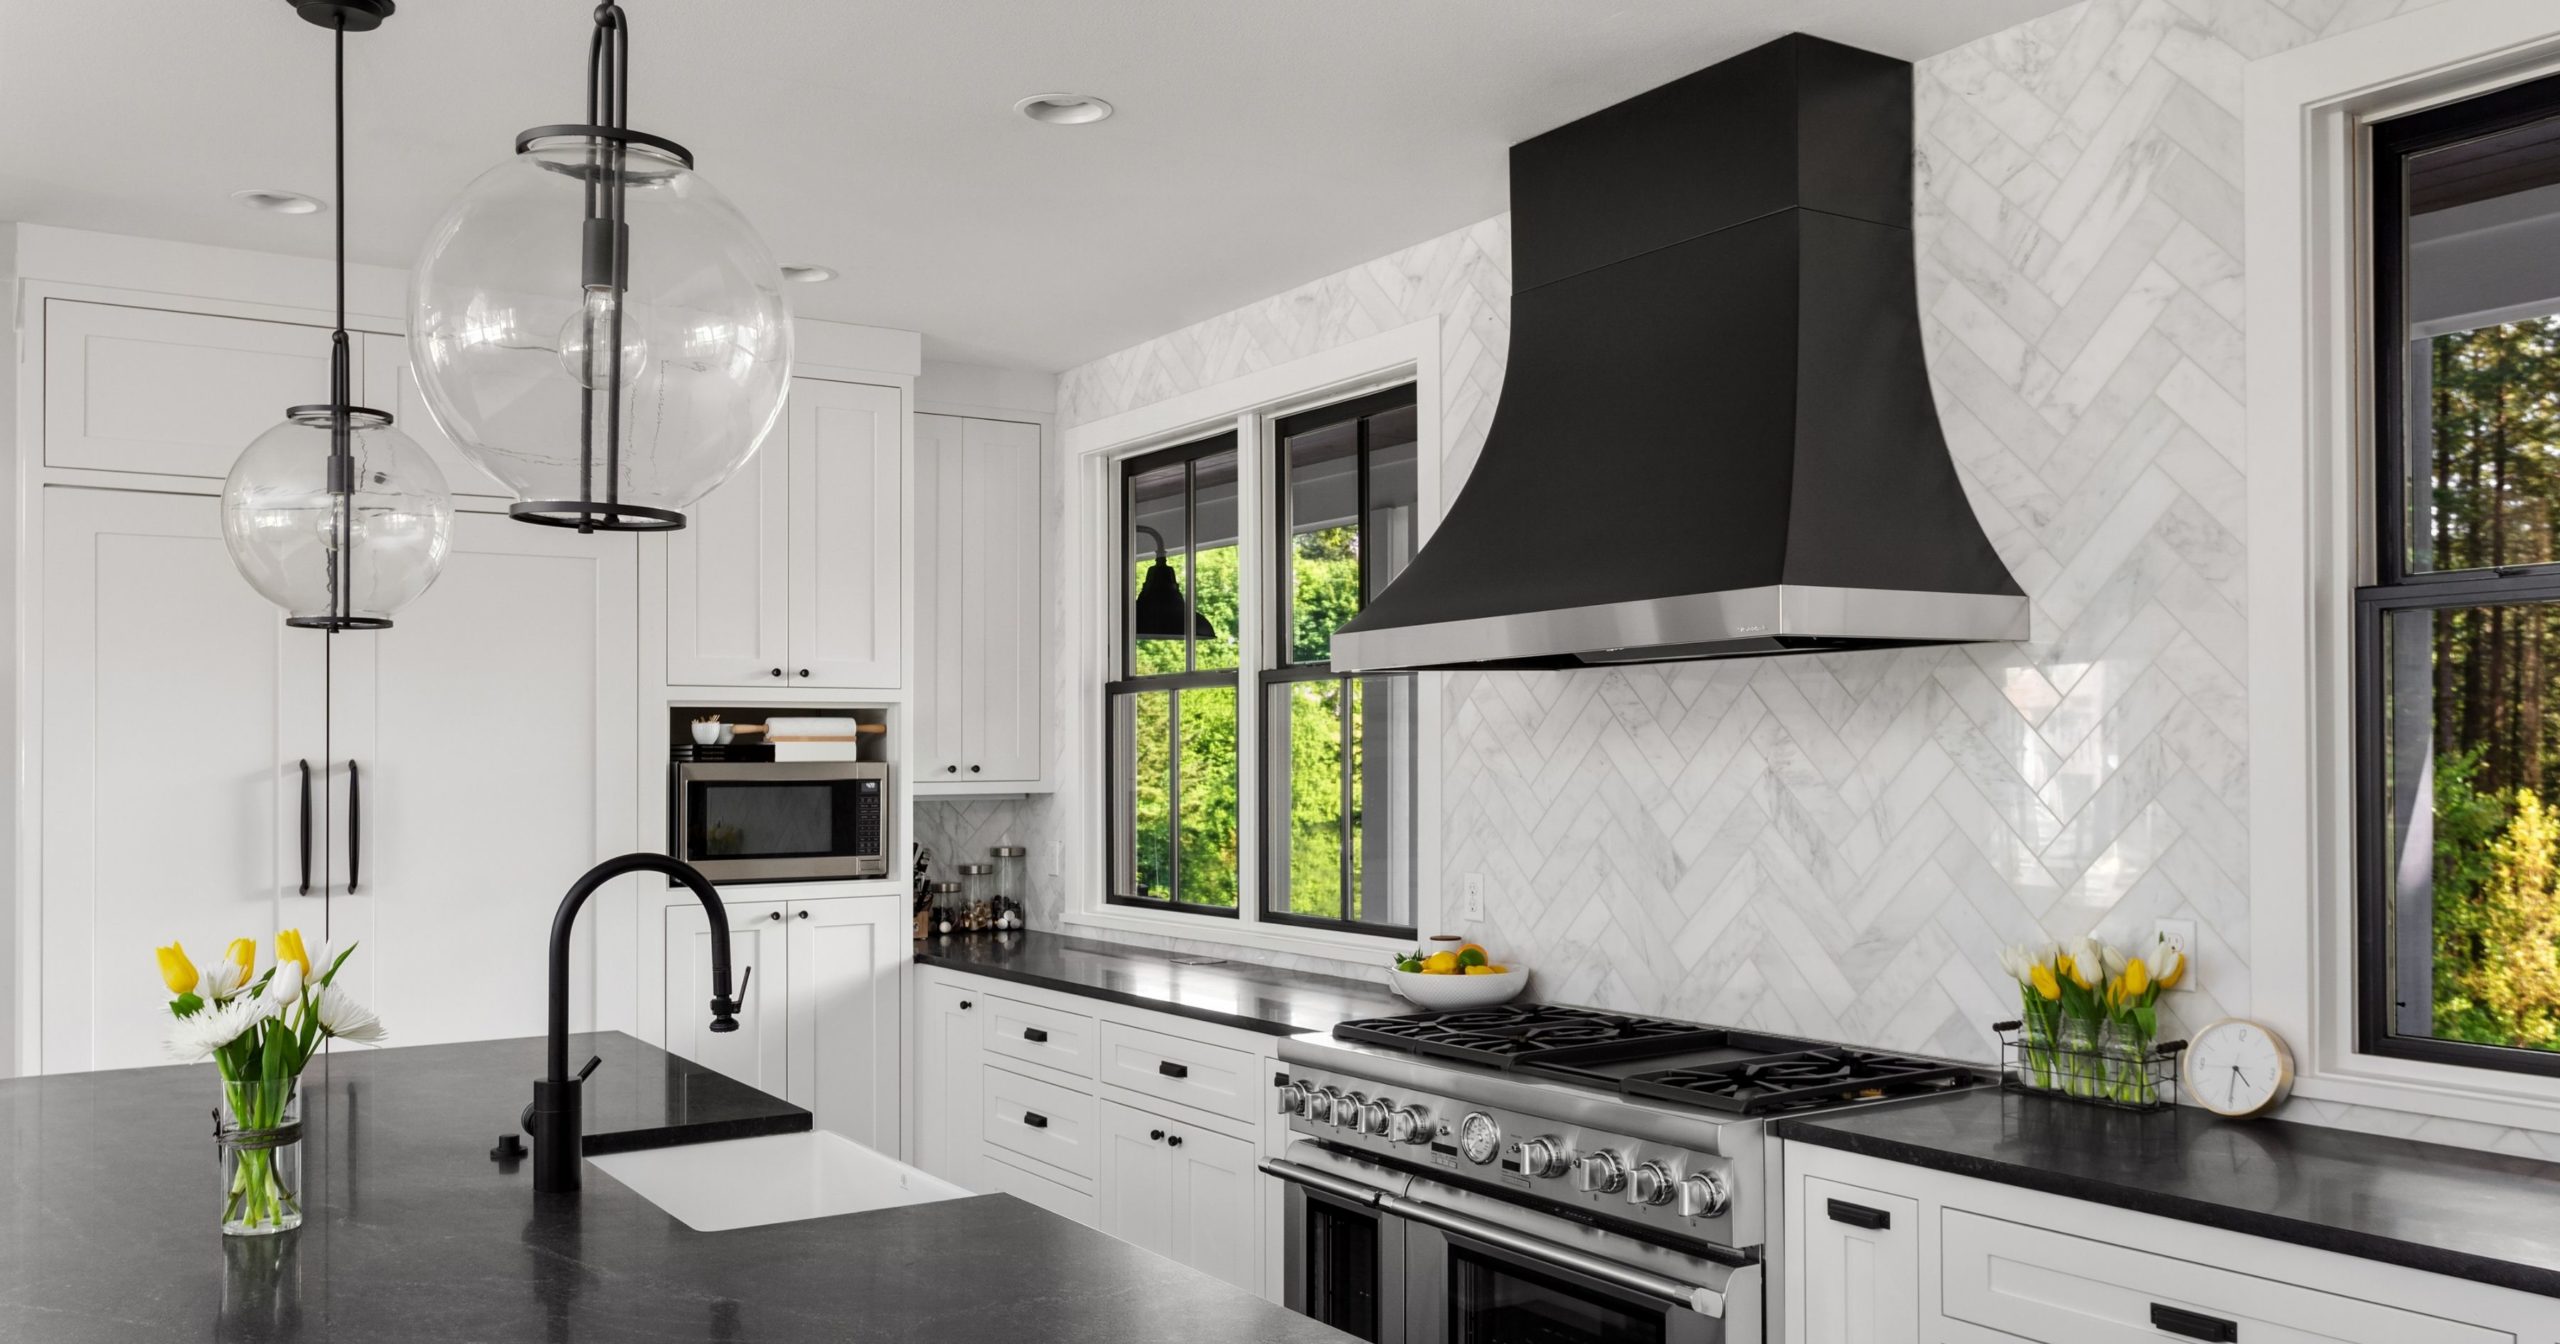 kitchen remodel with white and gray backsplash materials